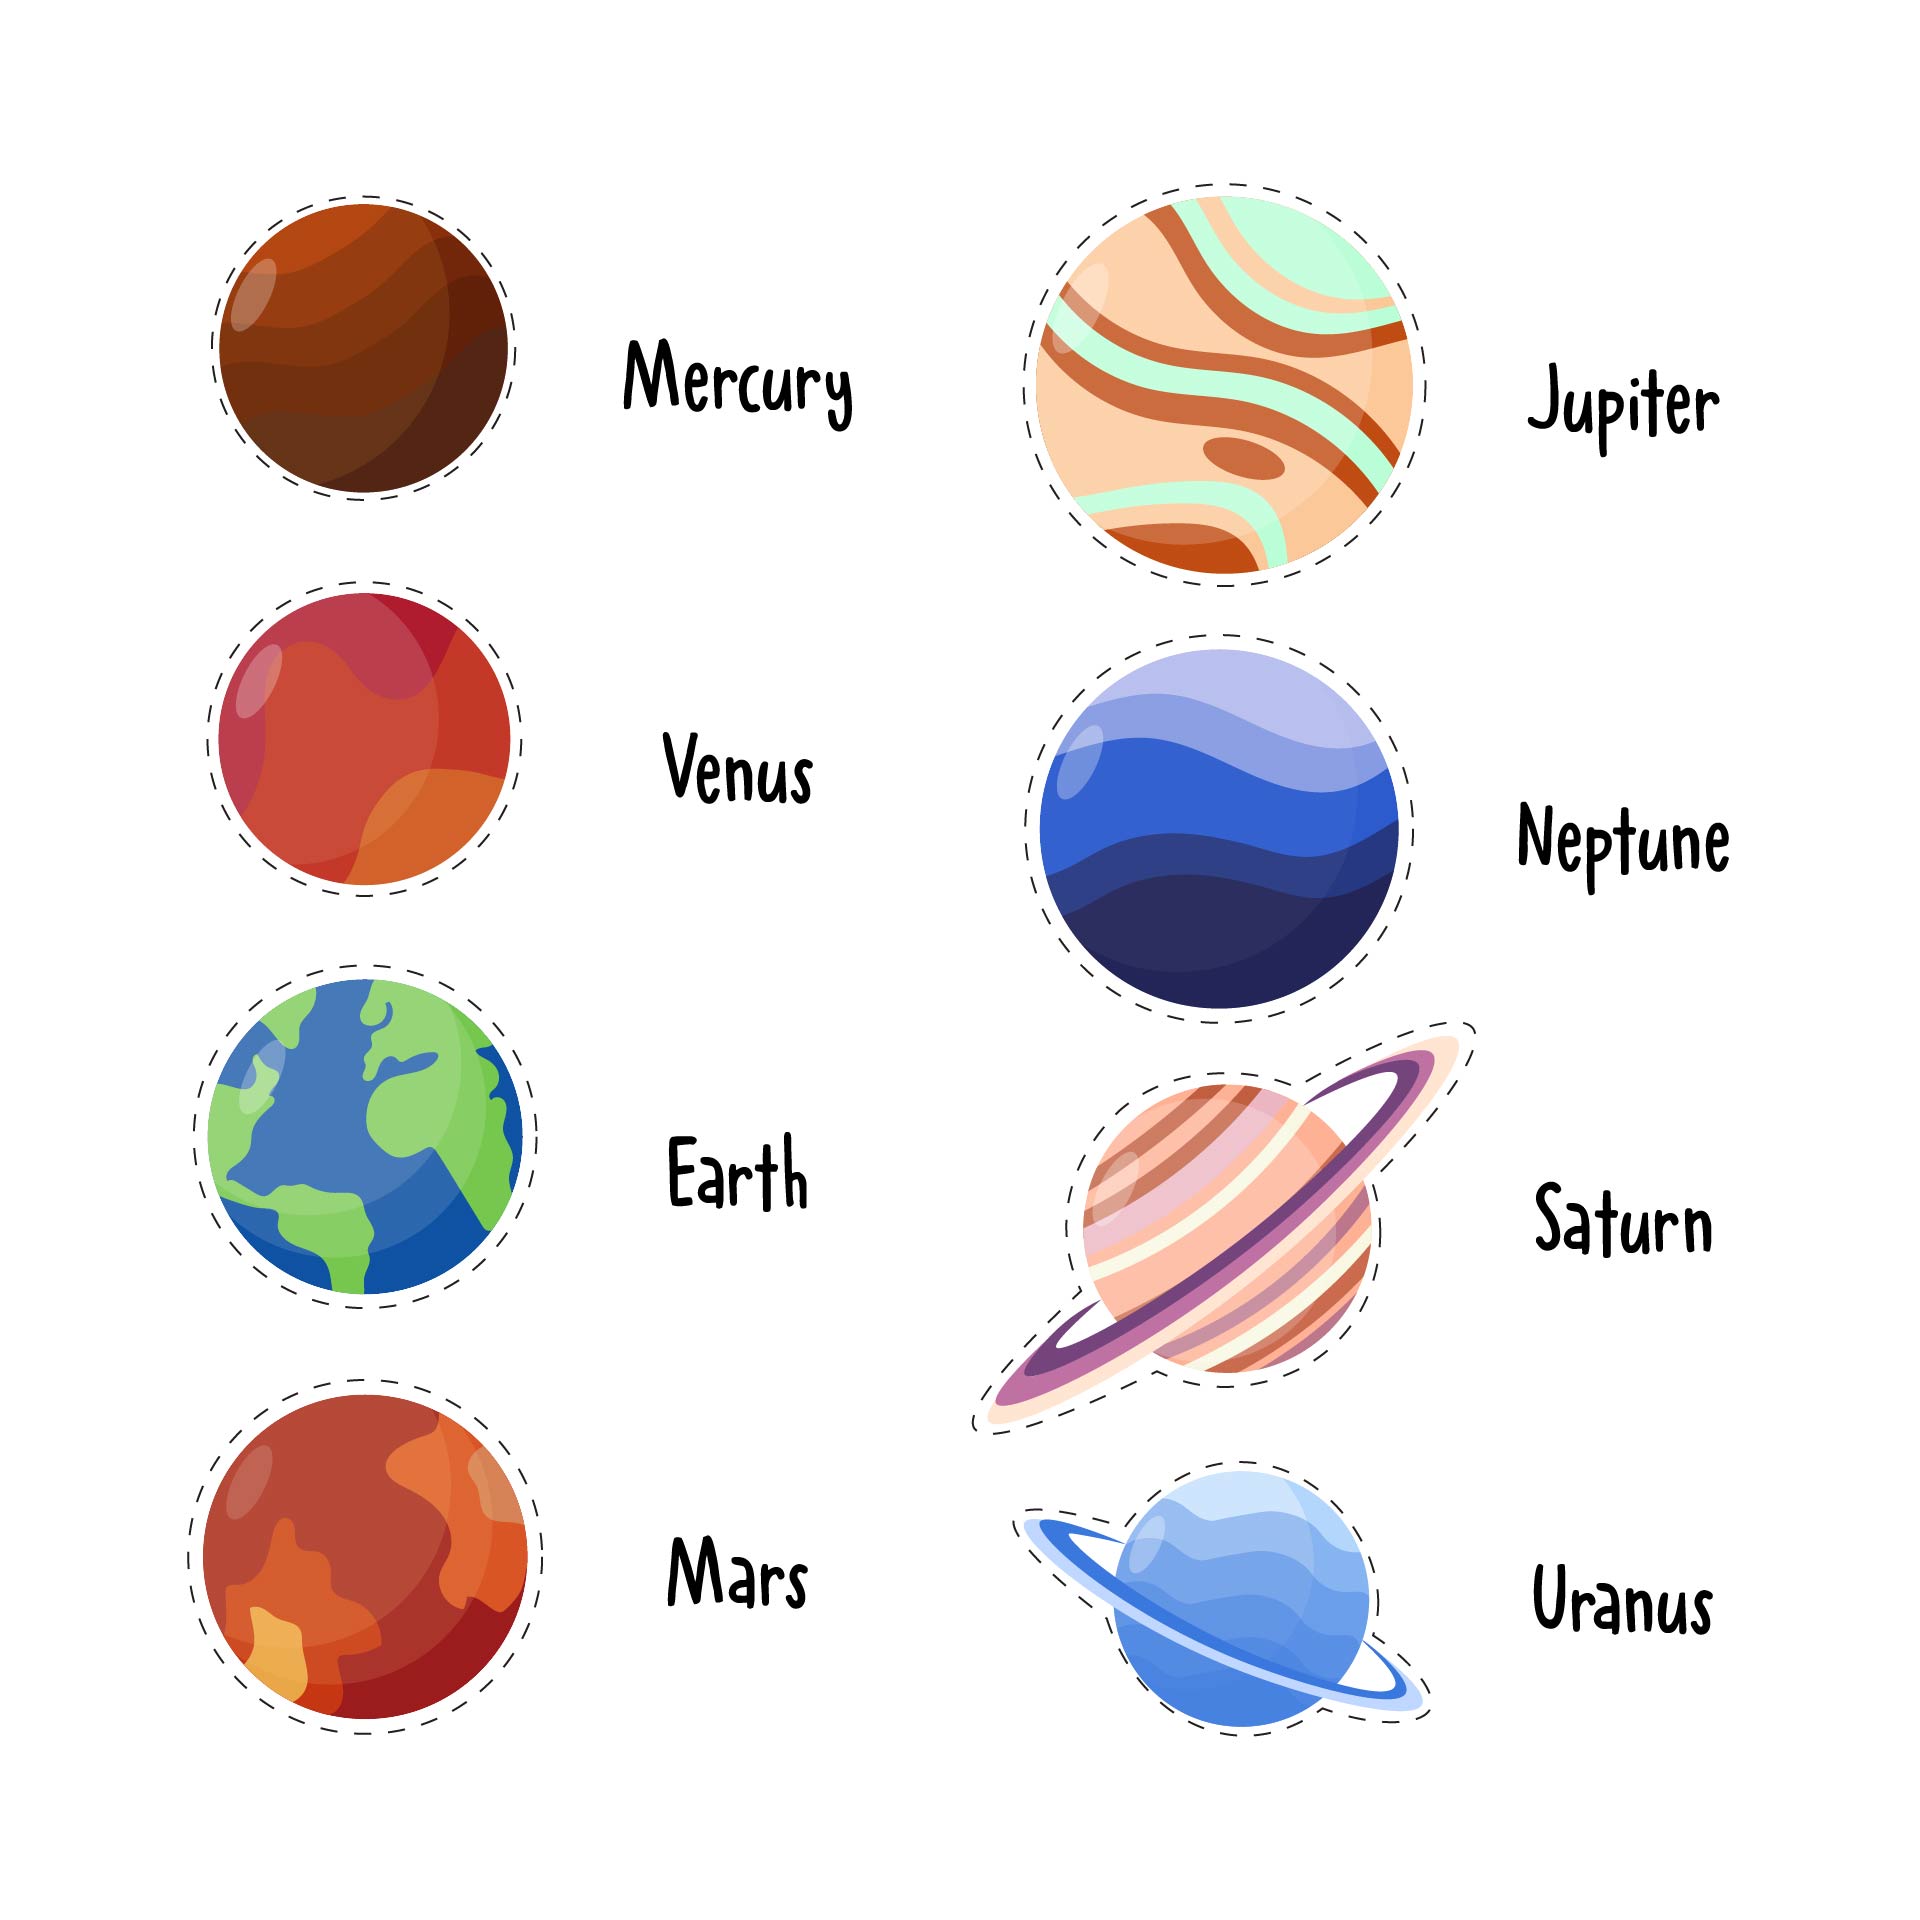 9 Best Images of Printable Planet Cut Outs - Planets Solar ...
 Planets For Kids Printables